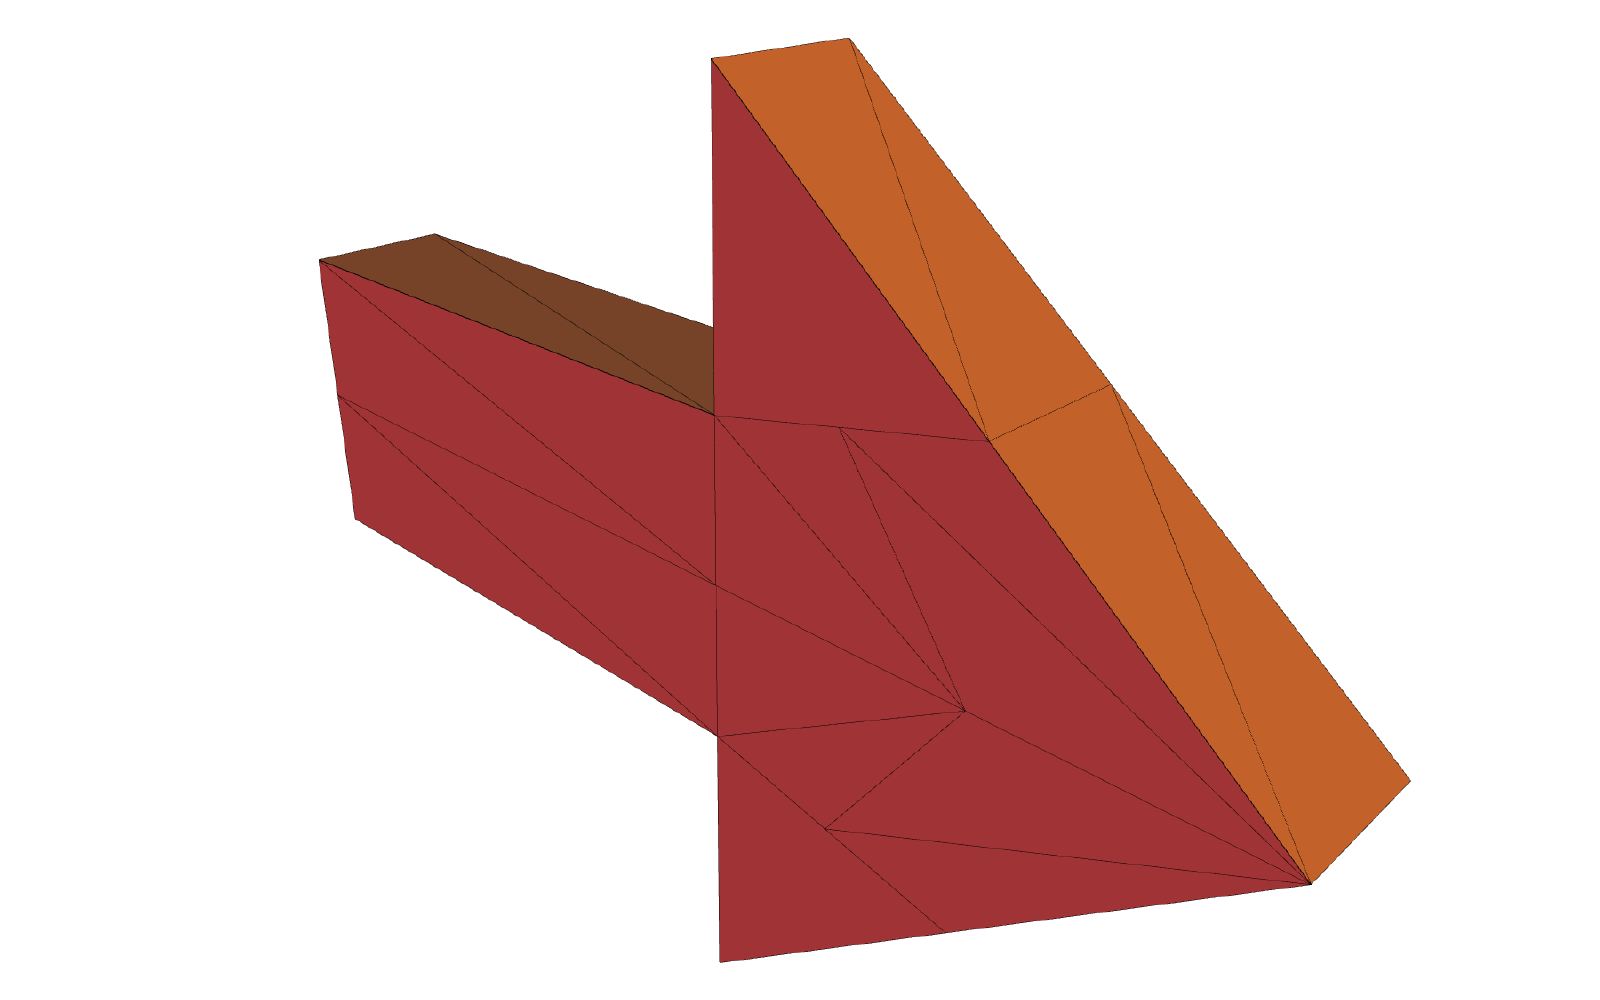 3D Model of an Arrow For Drawing Reference